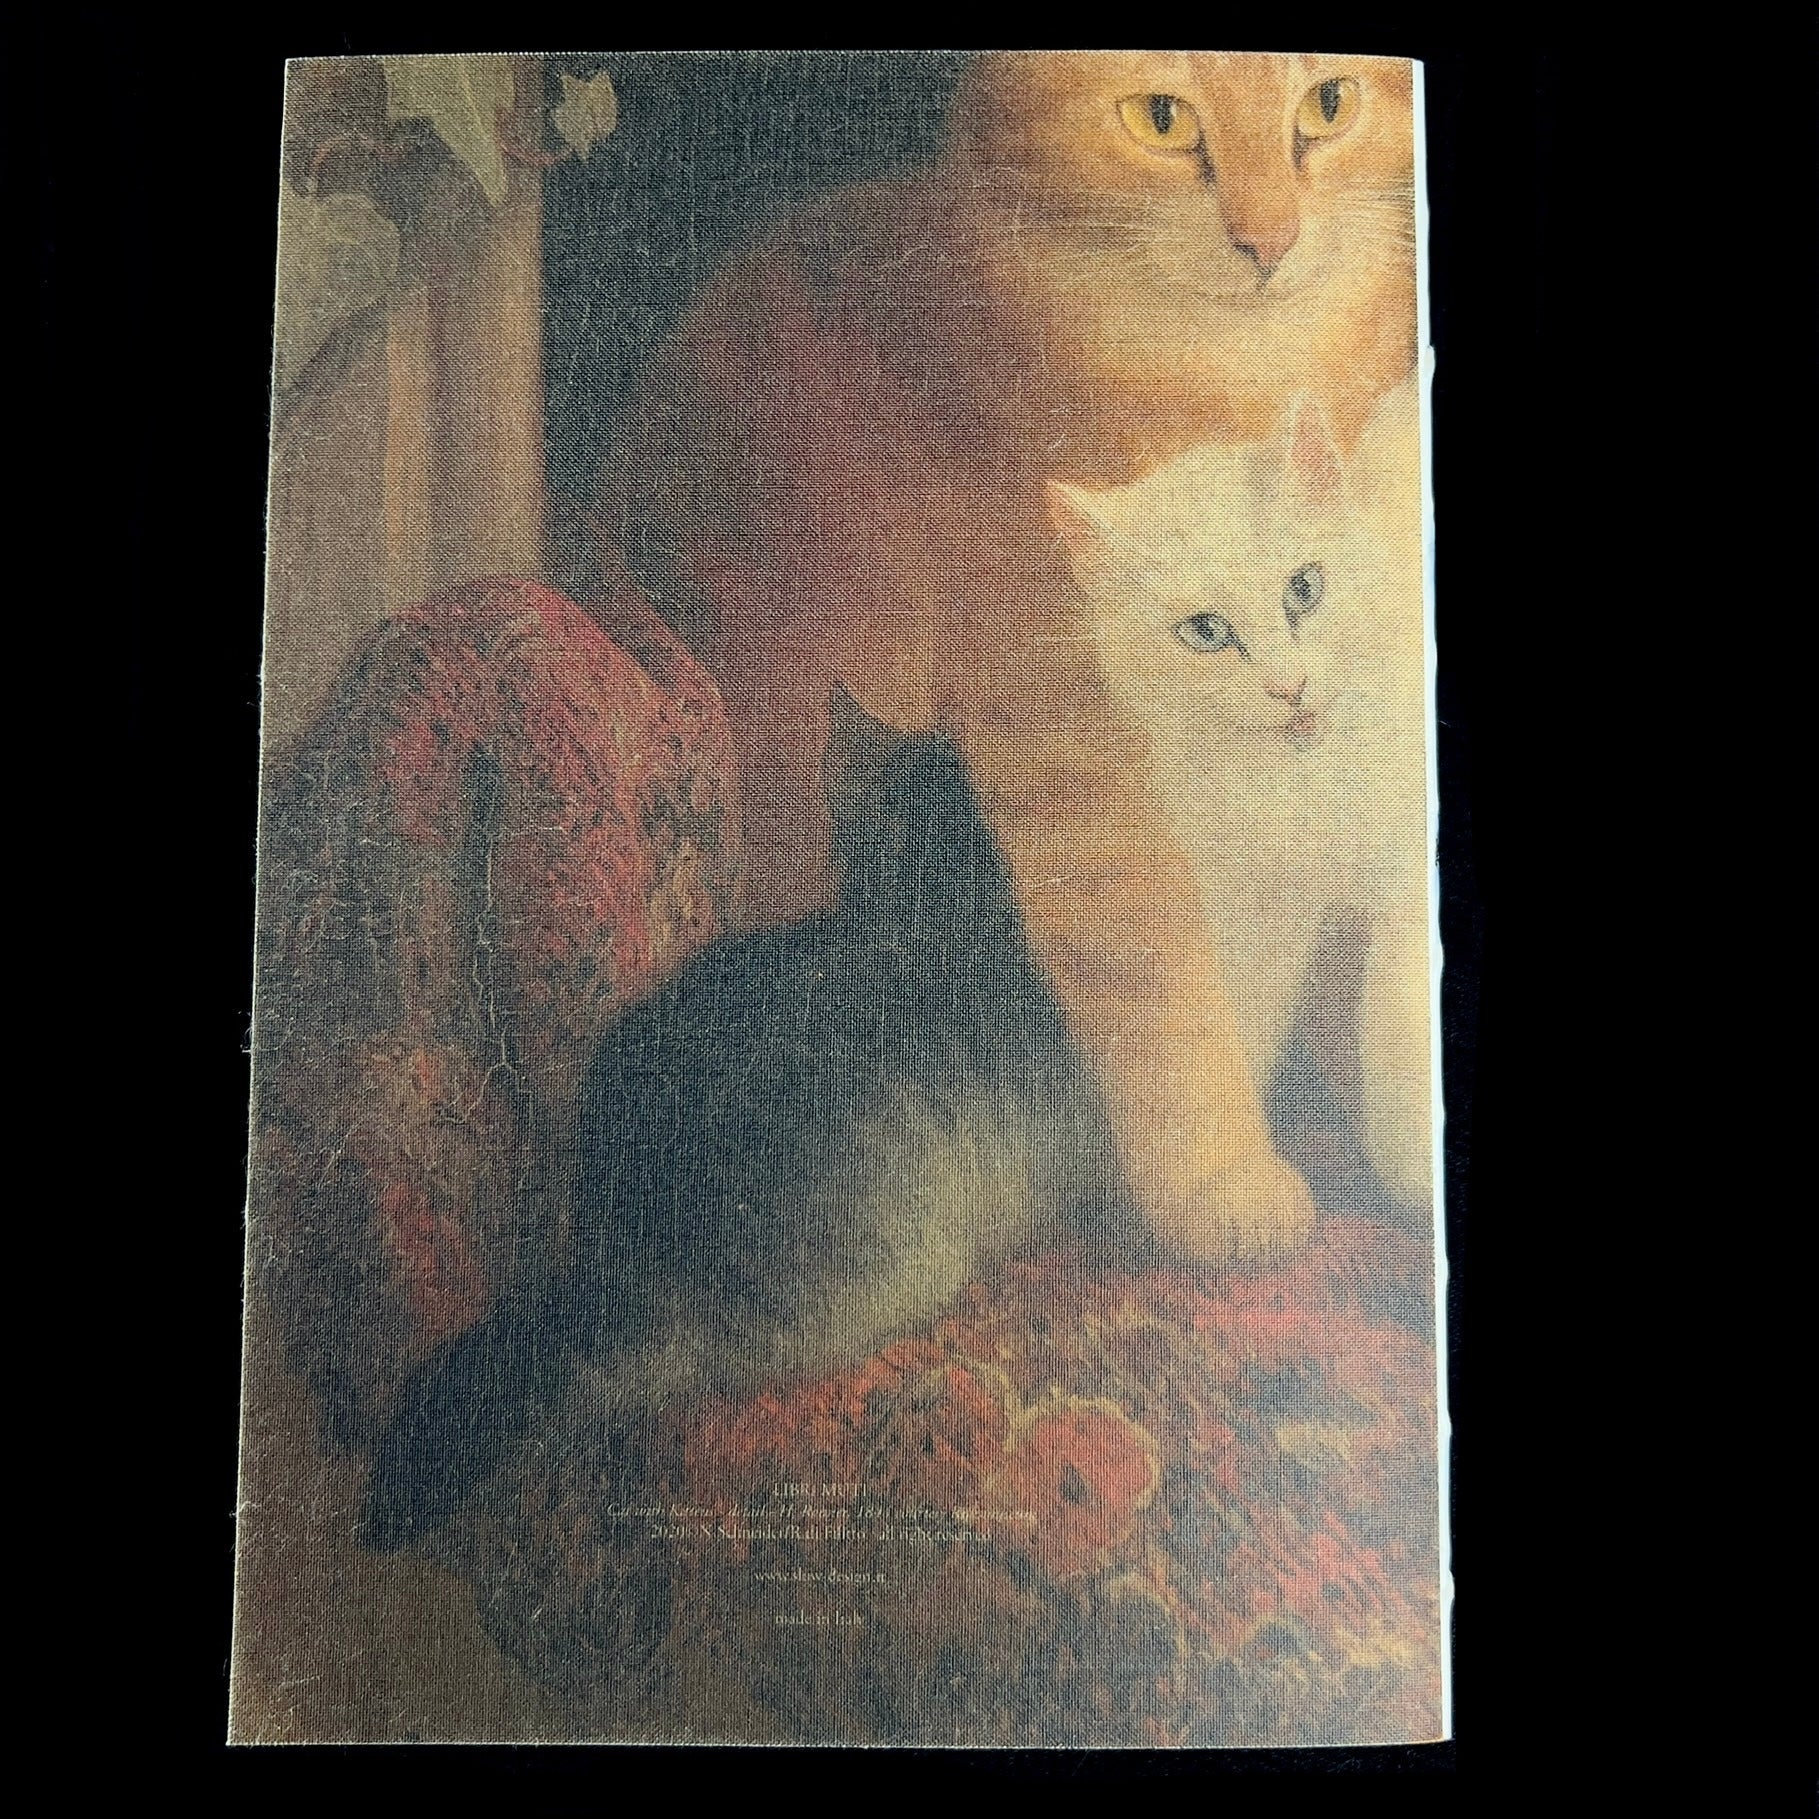 Back cover of Cat Journal